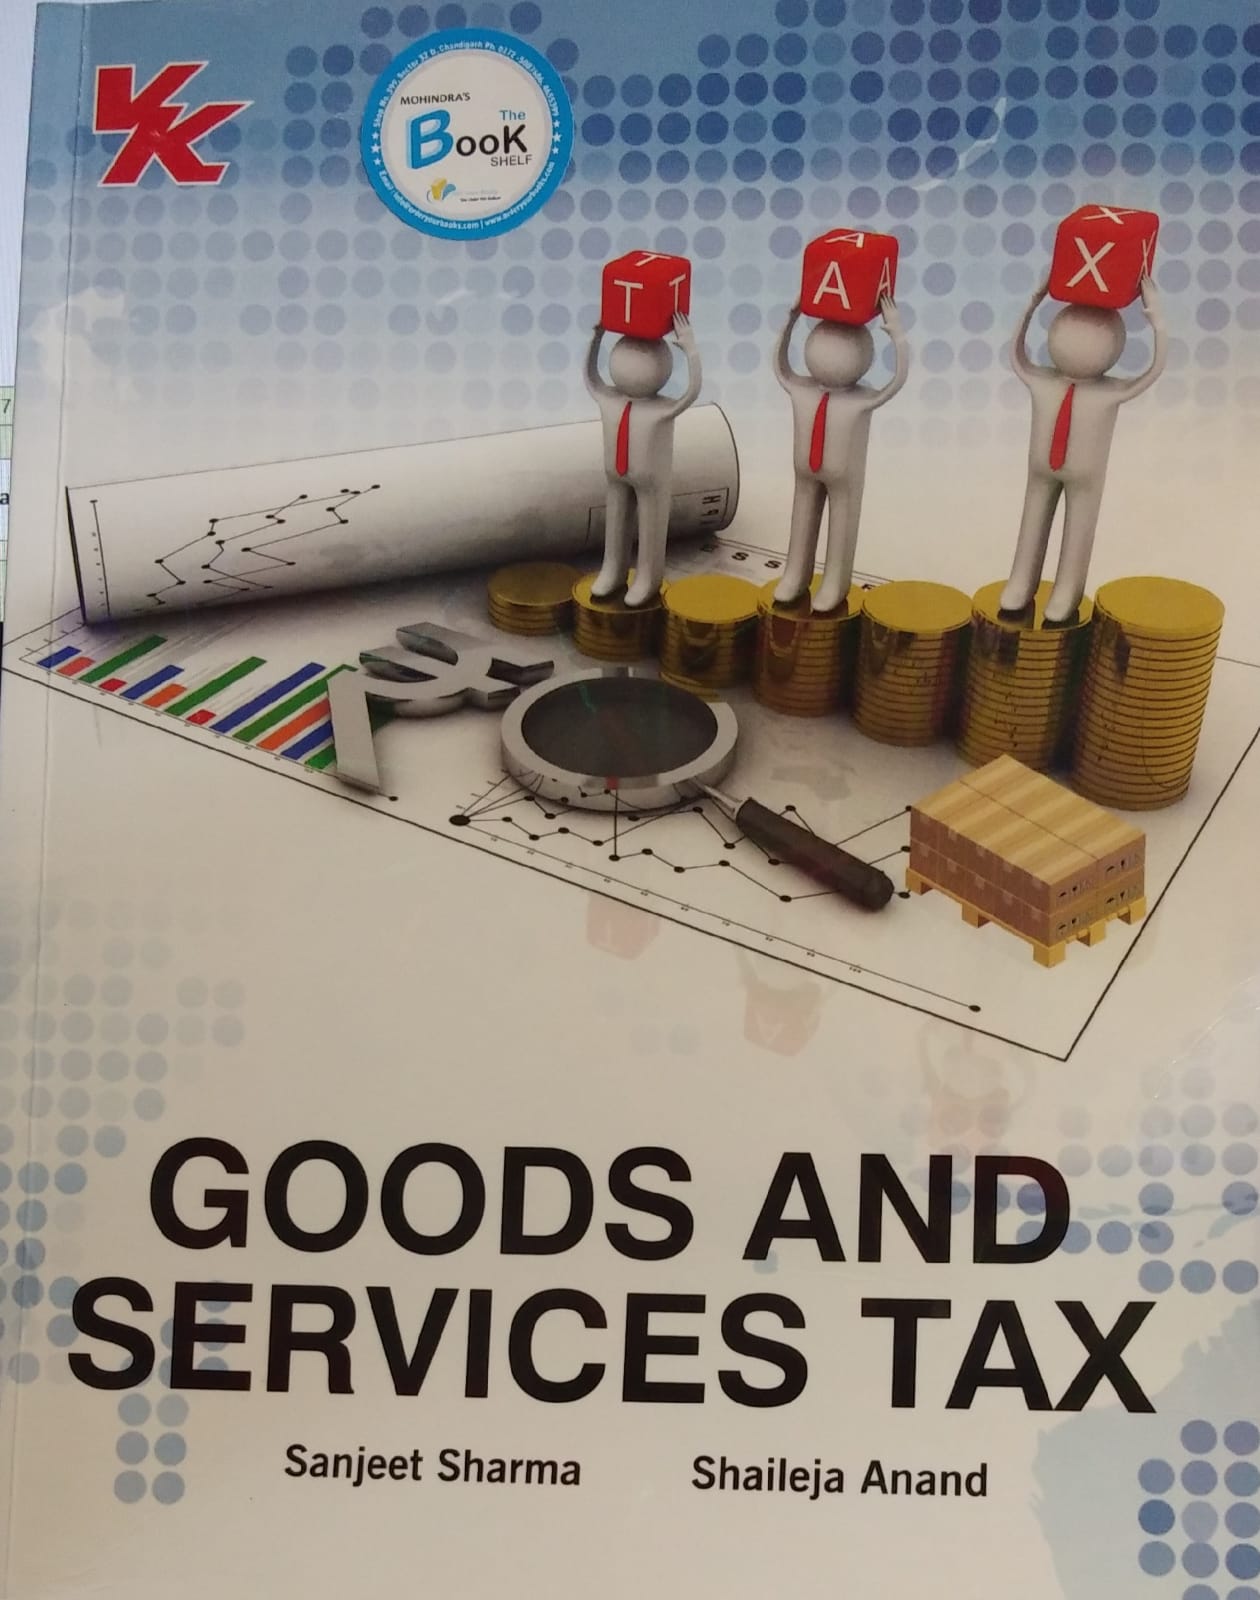 Goods and service tax , For B.Com. Sem. 3 P.U. by Sanjeet sharma and Shaileja anand vk publishers 2023